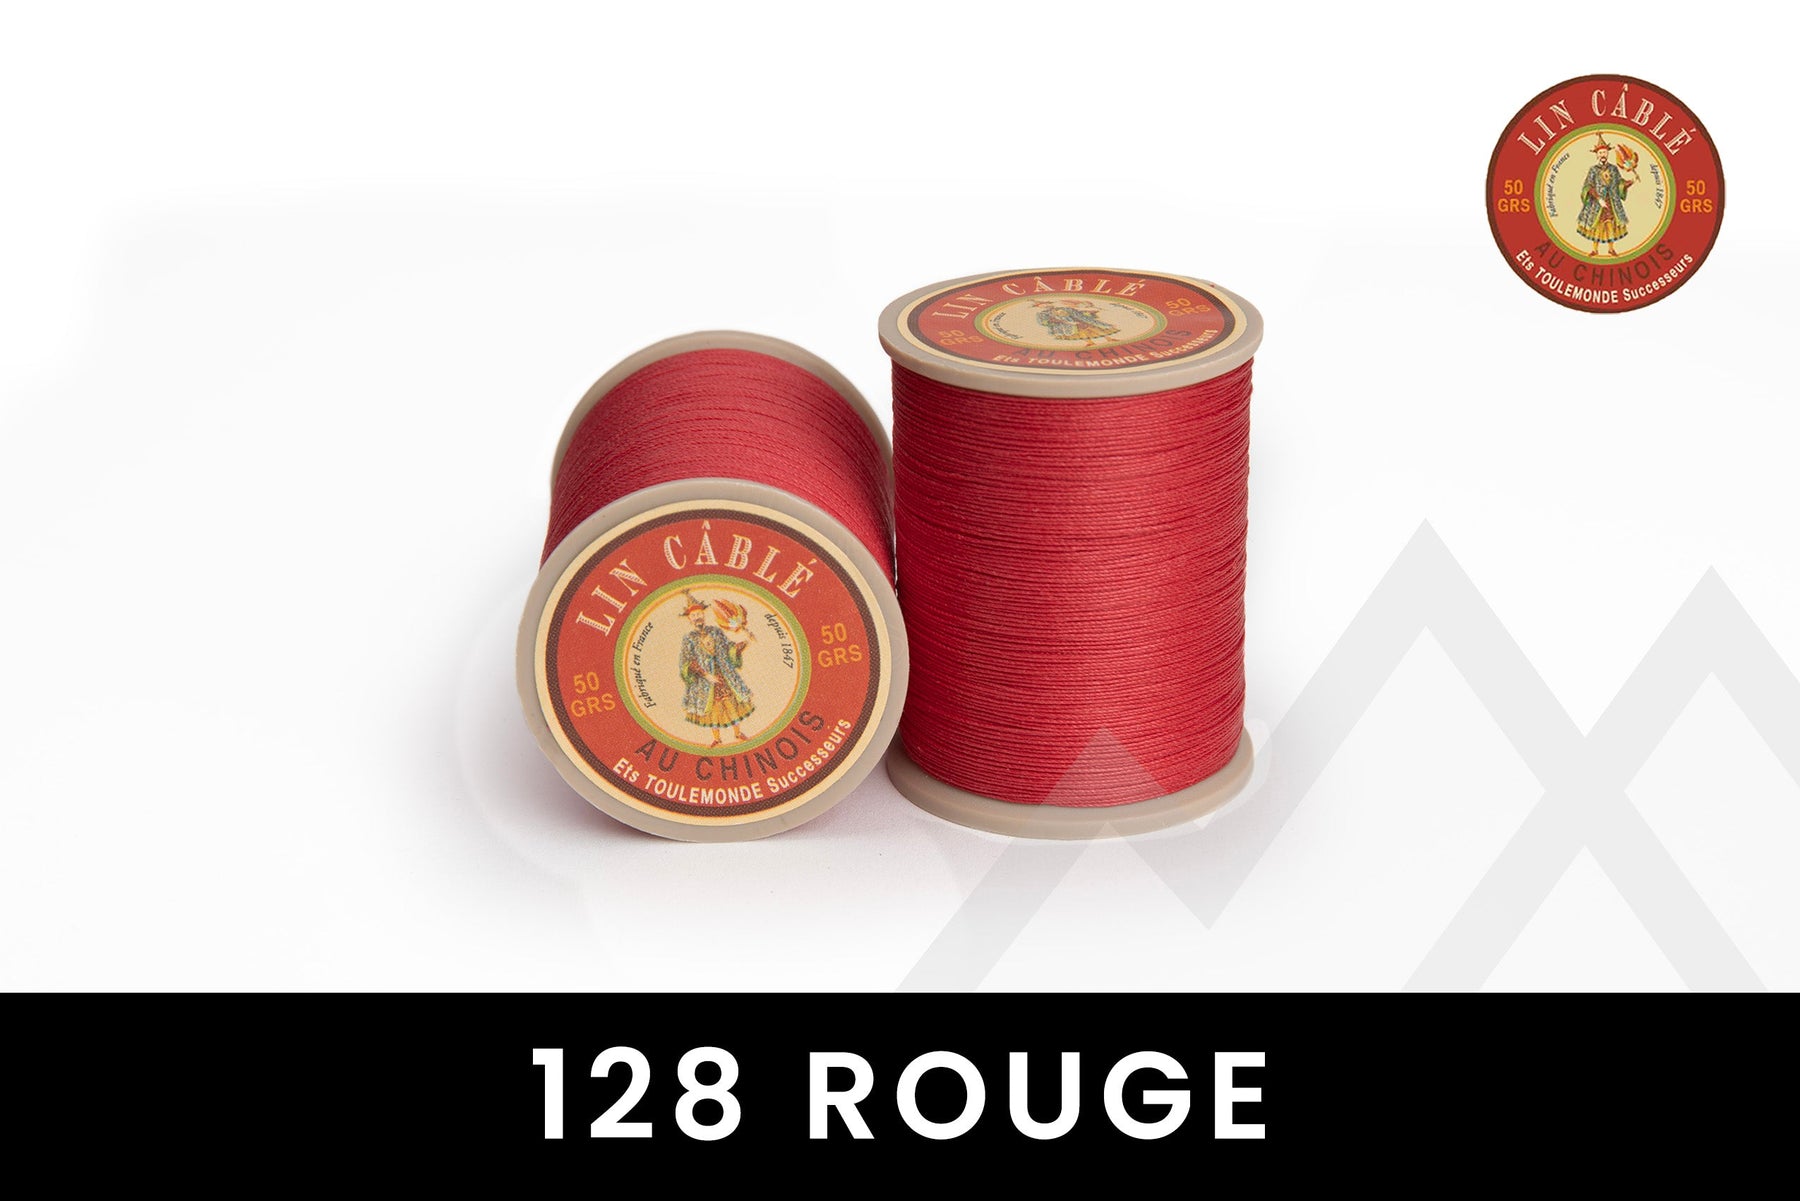 Fil au Chinois 🇫🇷 - "Lin Cable" Waxed Linen Thread (Size 832) *Full Spool